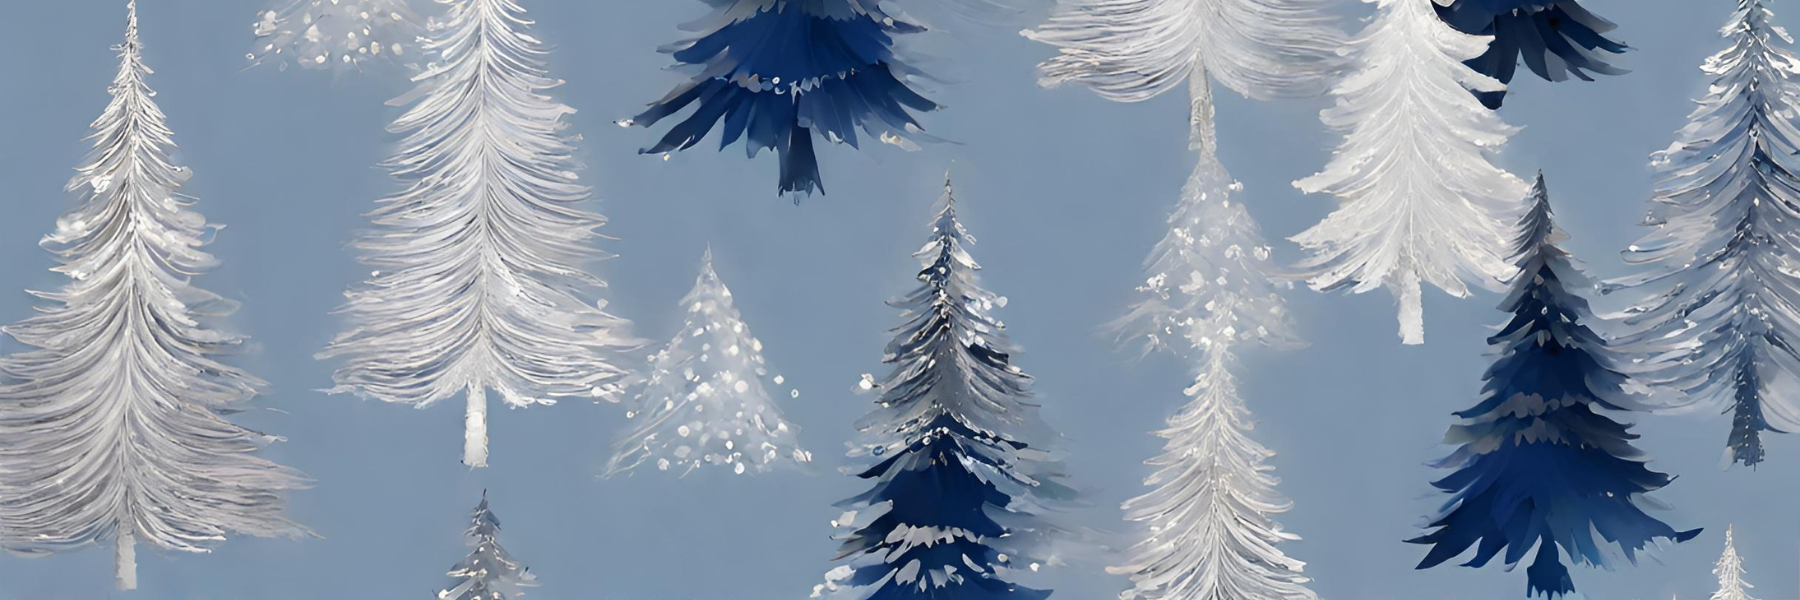 Blue And Silver Christmas Decor 